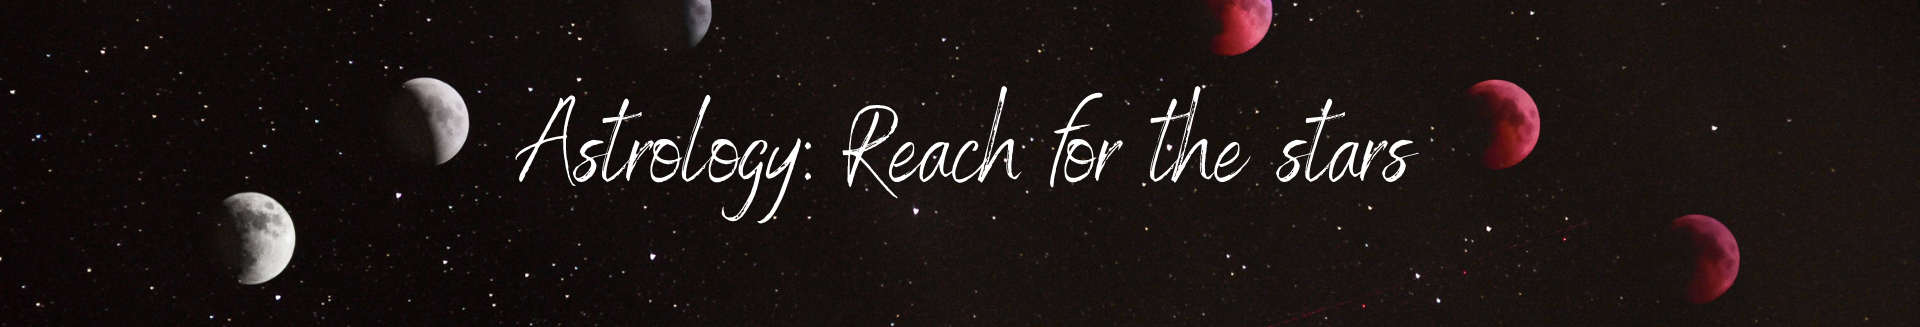 Astrology: Reach for the stars